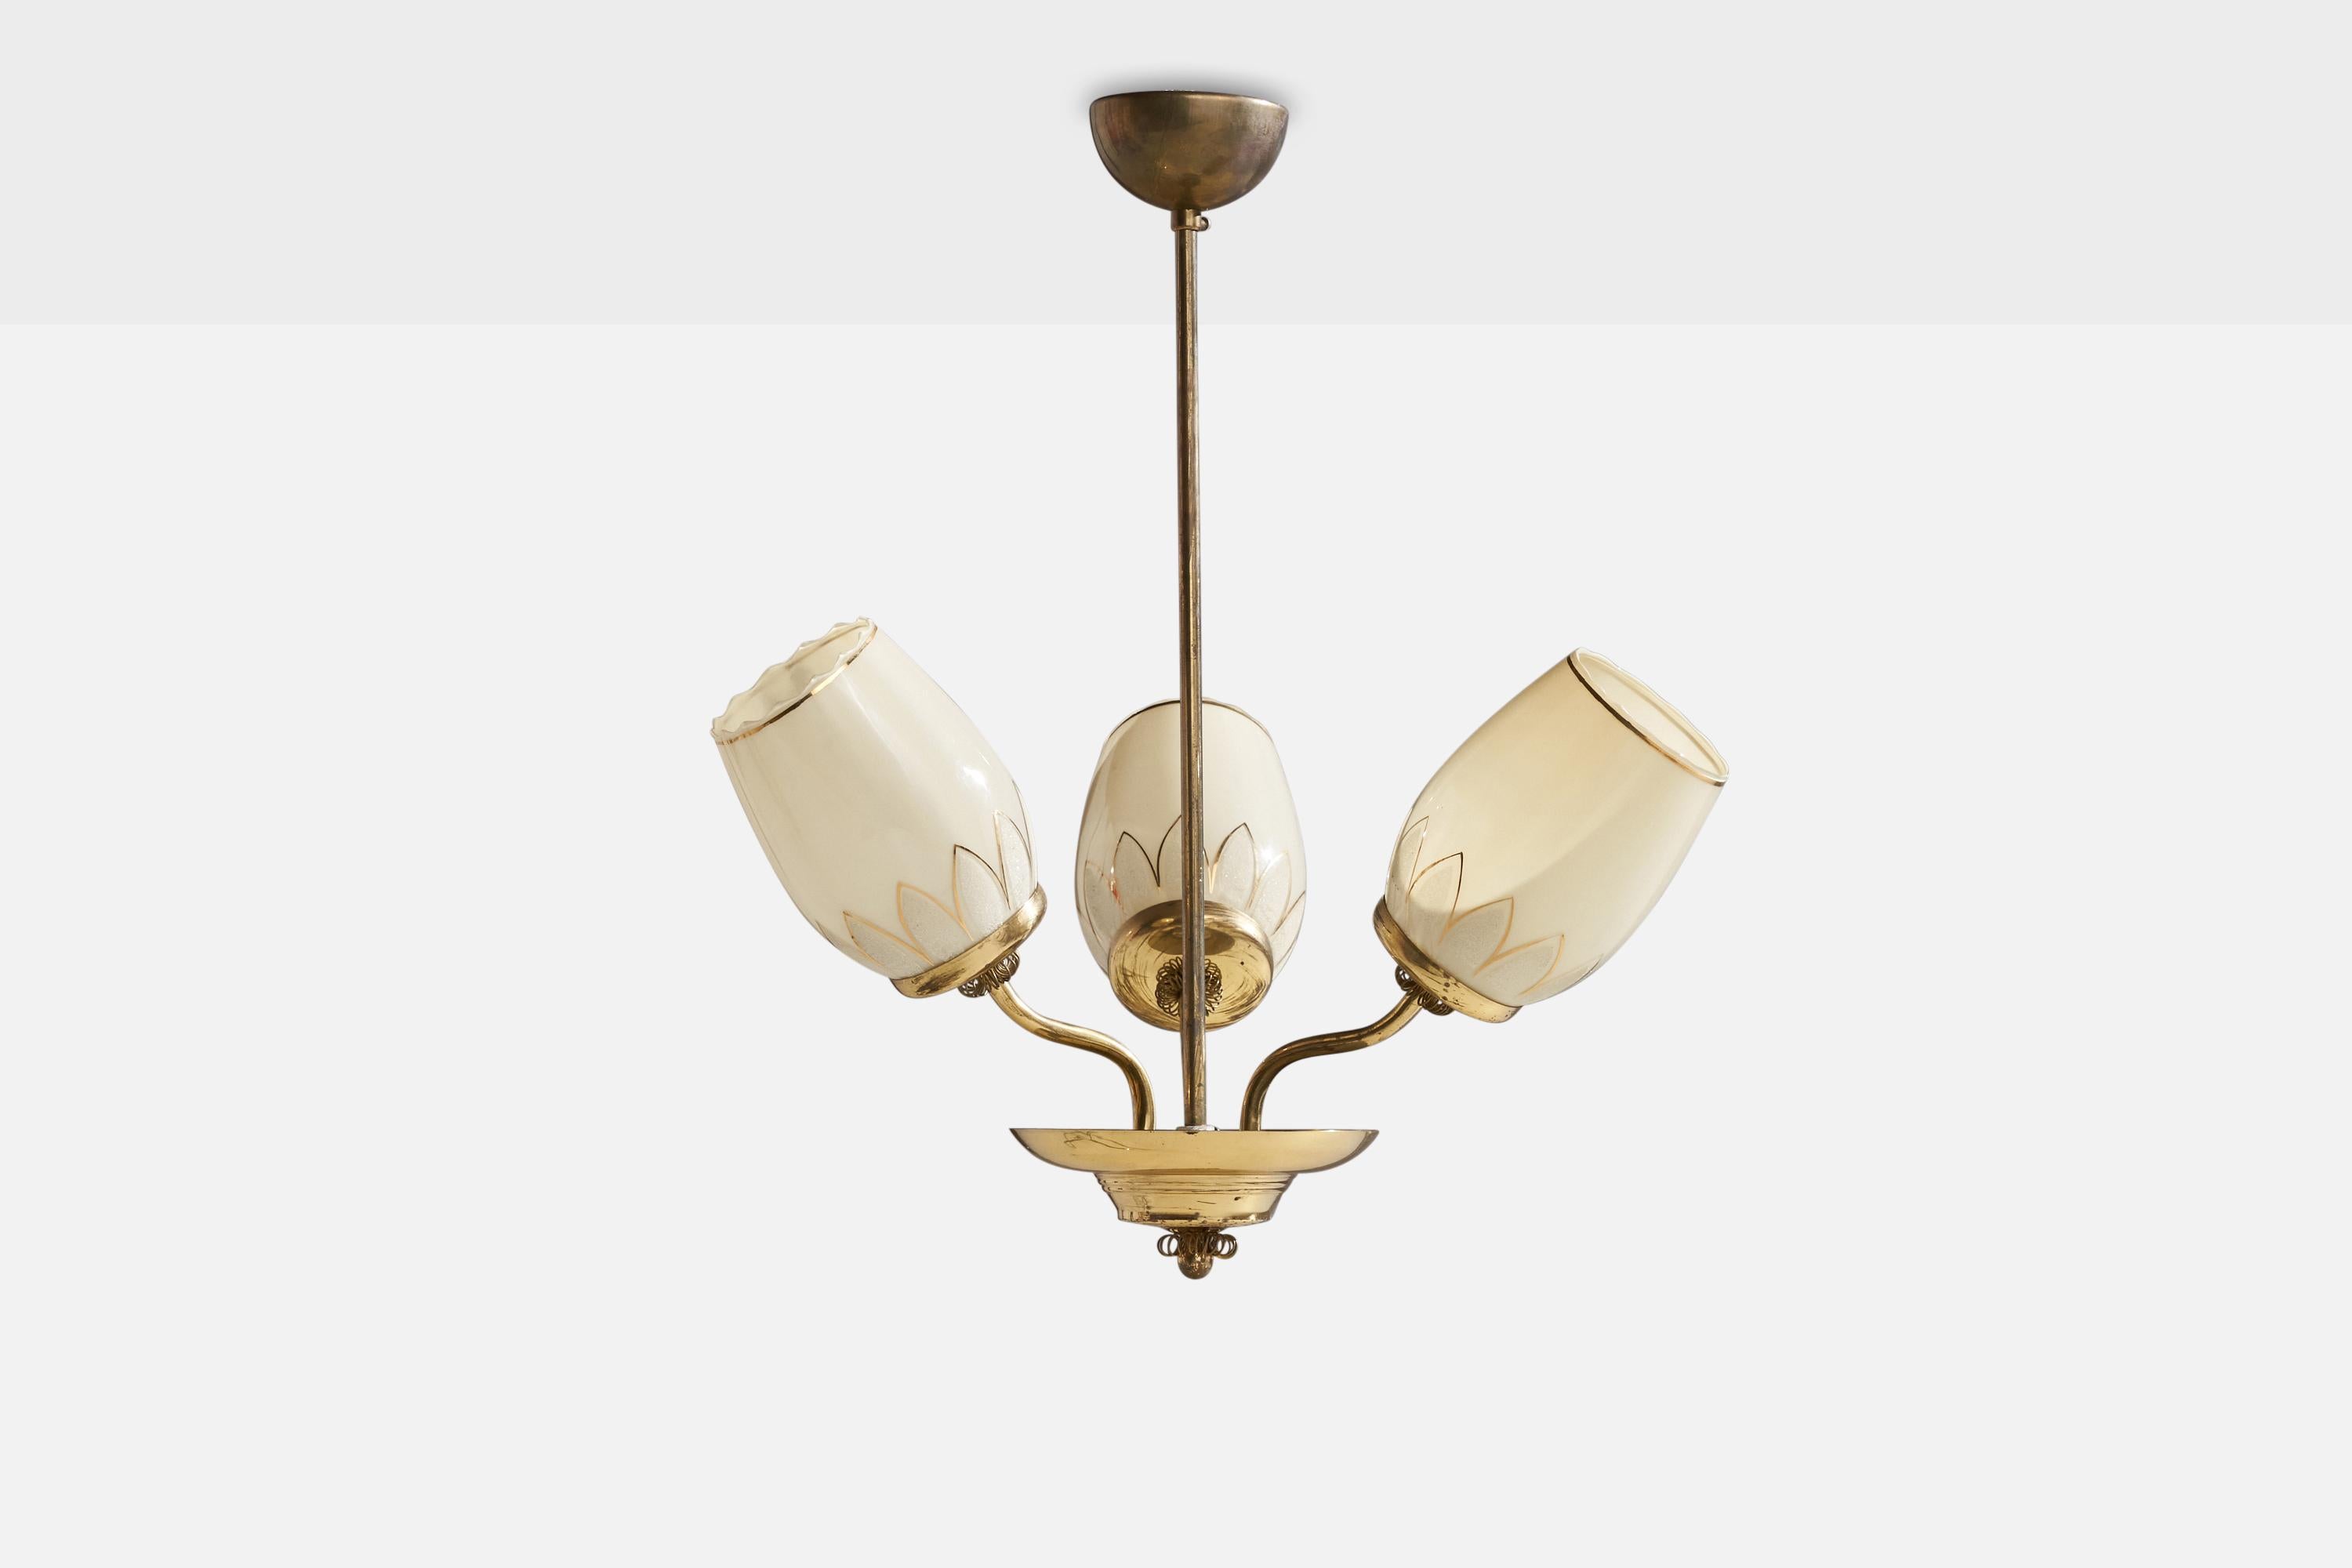 A brass and gilded opaline glass chandelier designed and produced in Finland, 1940s.

Dimensions of canopy (inches): 2” H x 3.5” Diameter
Socket takes standard E-26 bulbs. 3 socket.There is no maximum wattage stated on the fixture. All lighting will